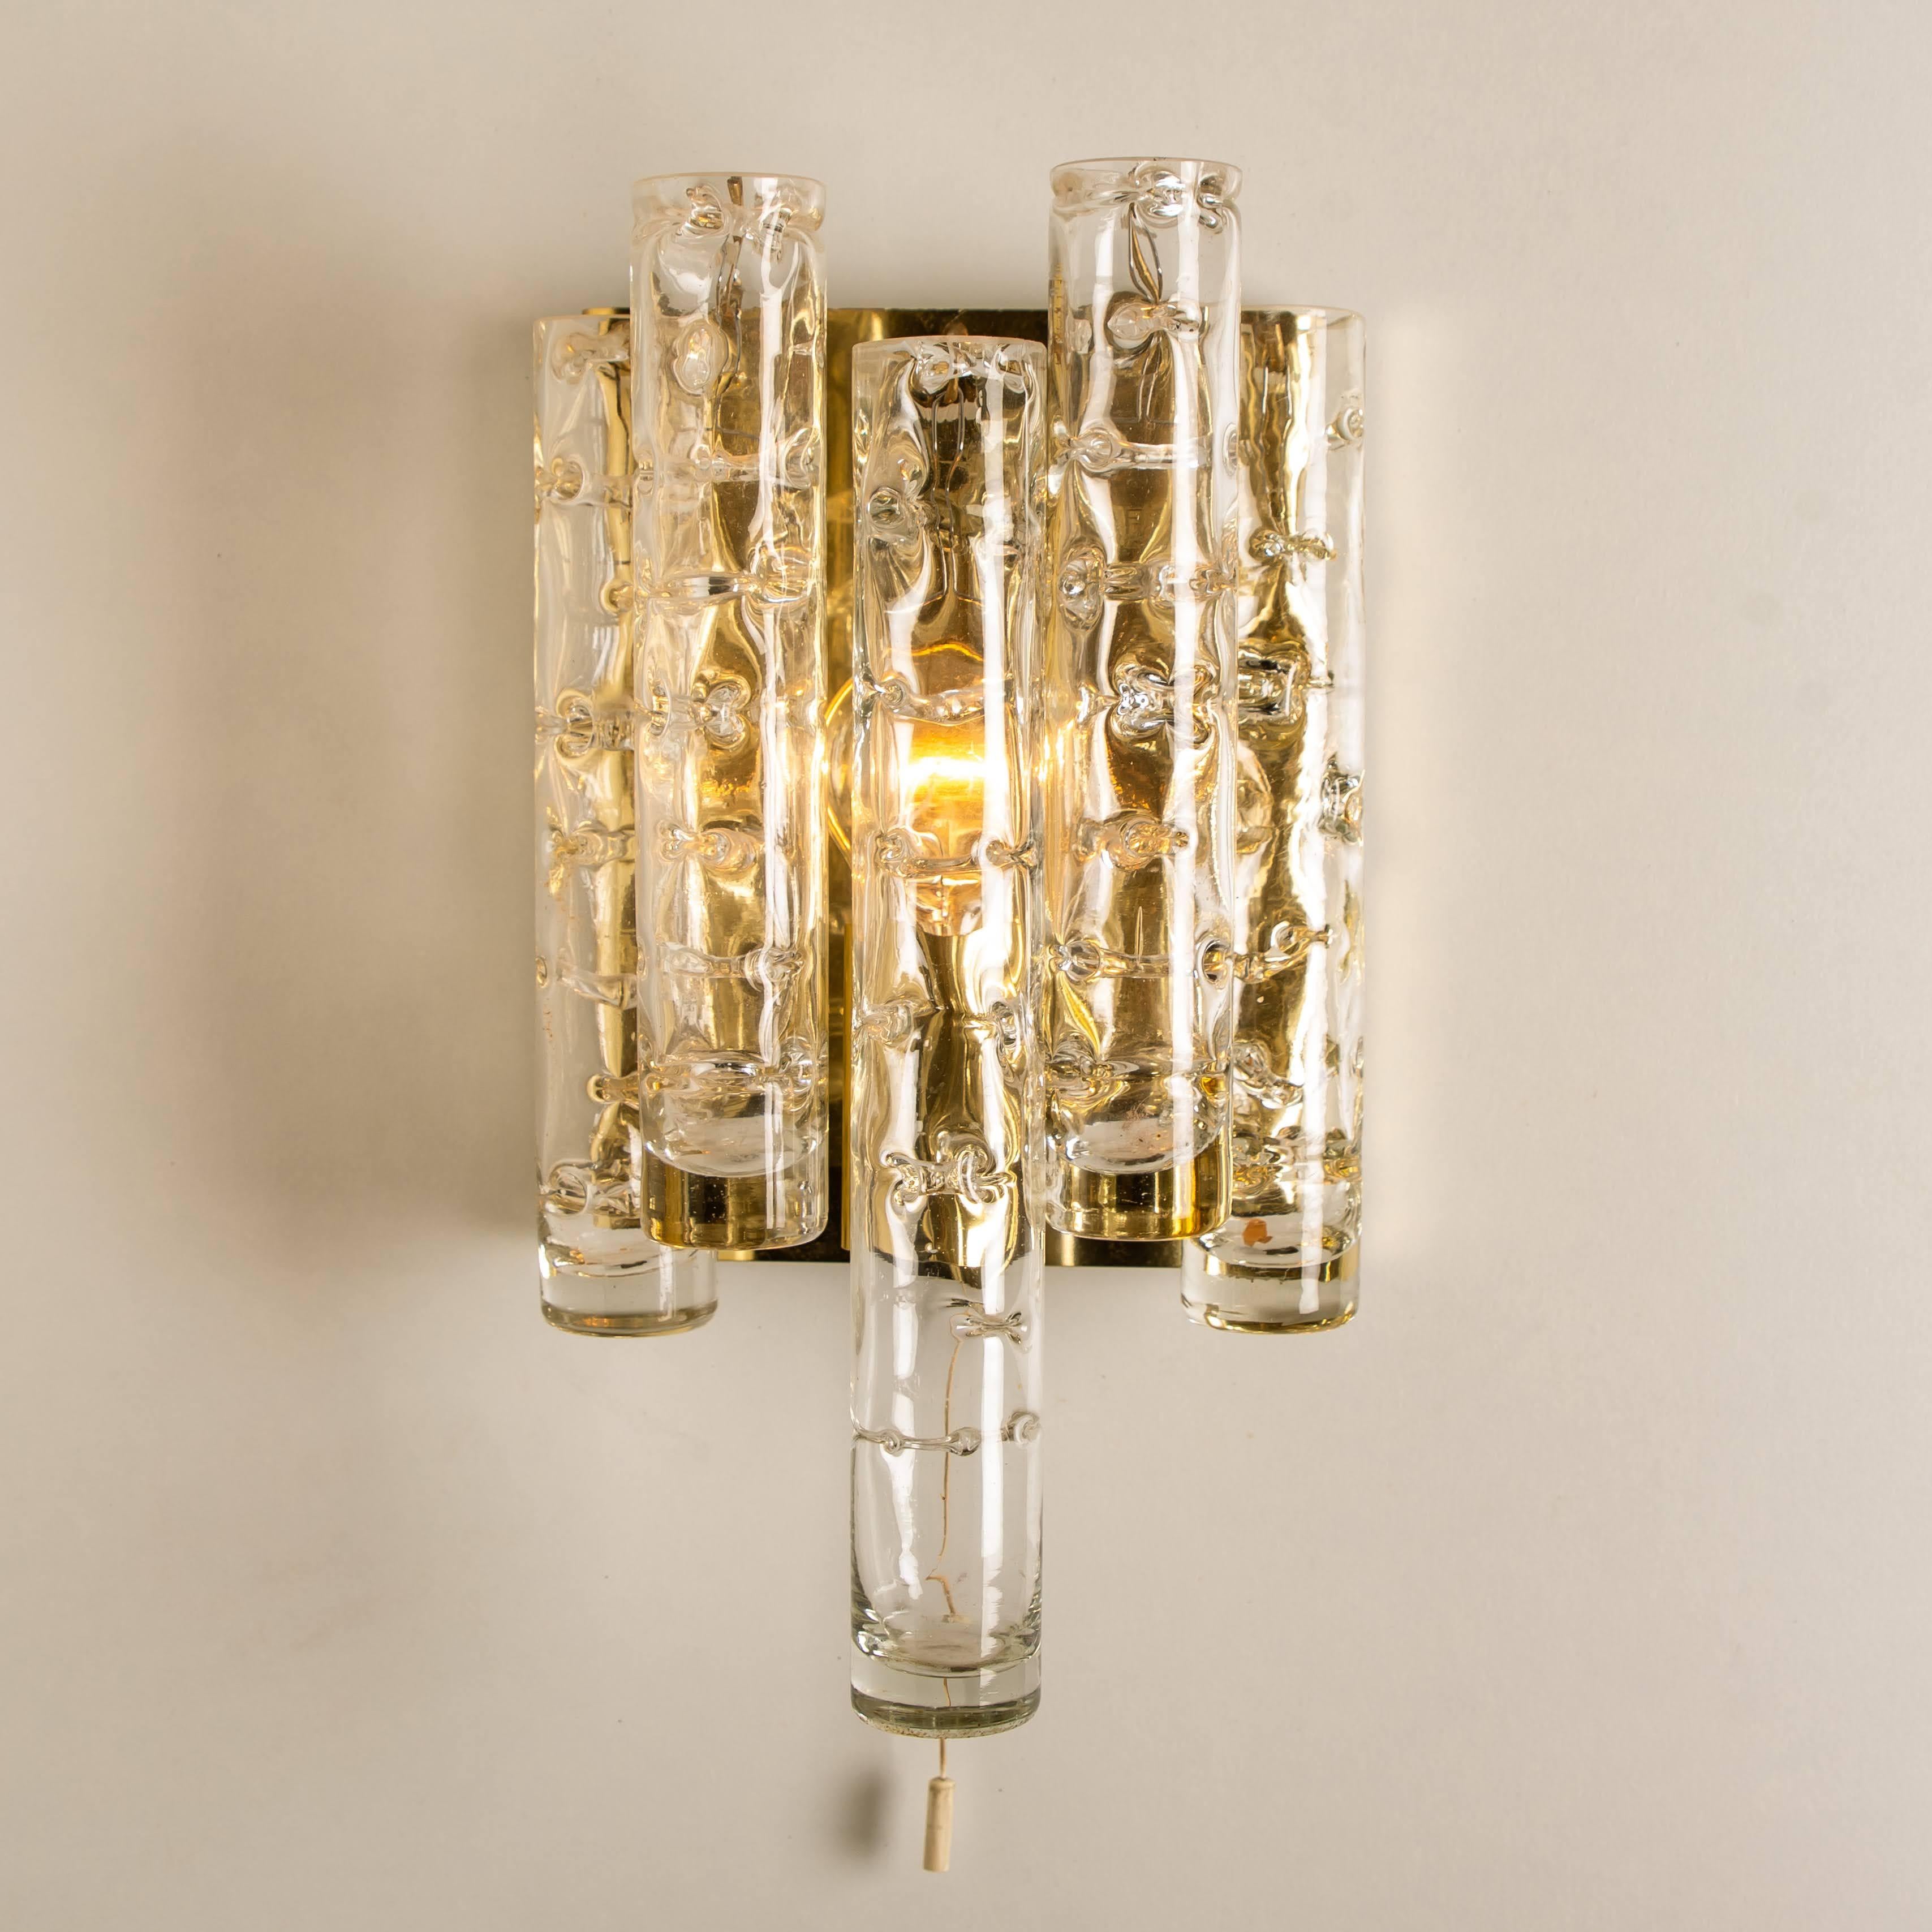 Pair of Doria Wall Lamps in Brass and Glass, 1960s For Sale 4